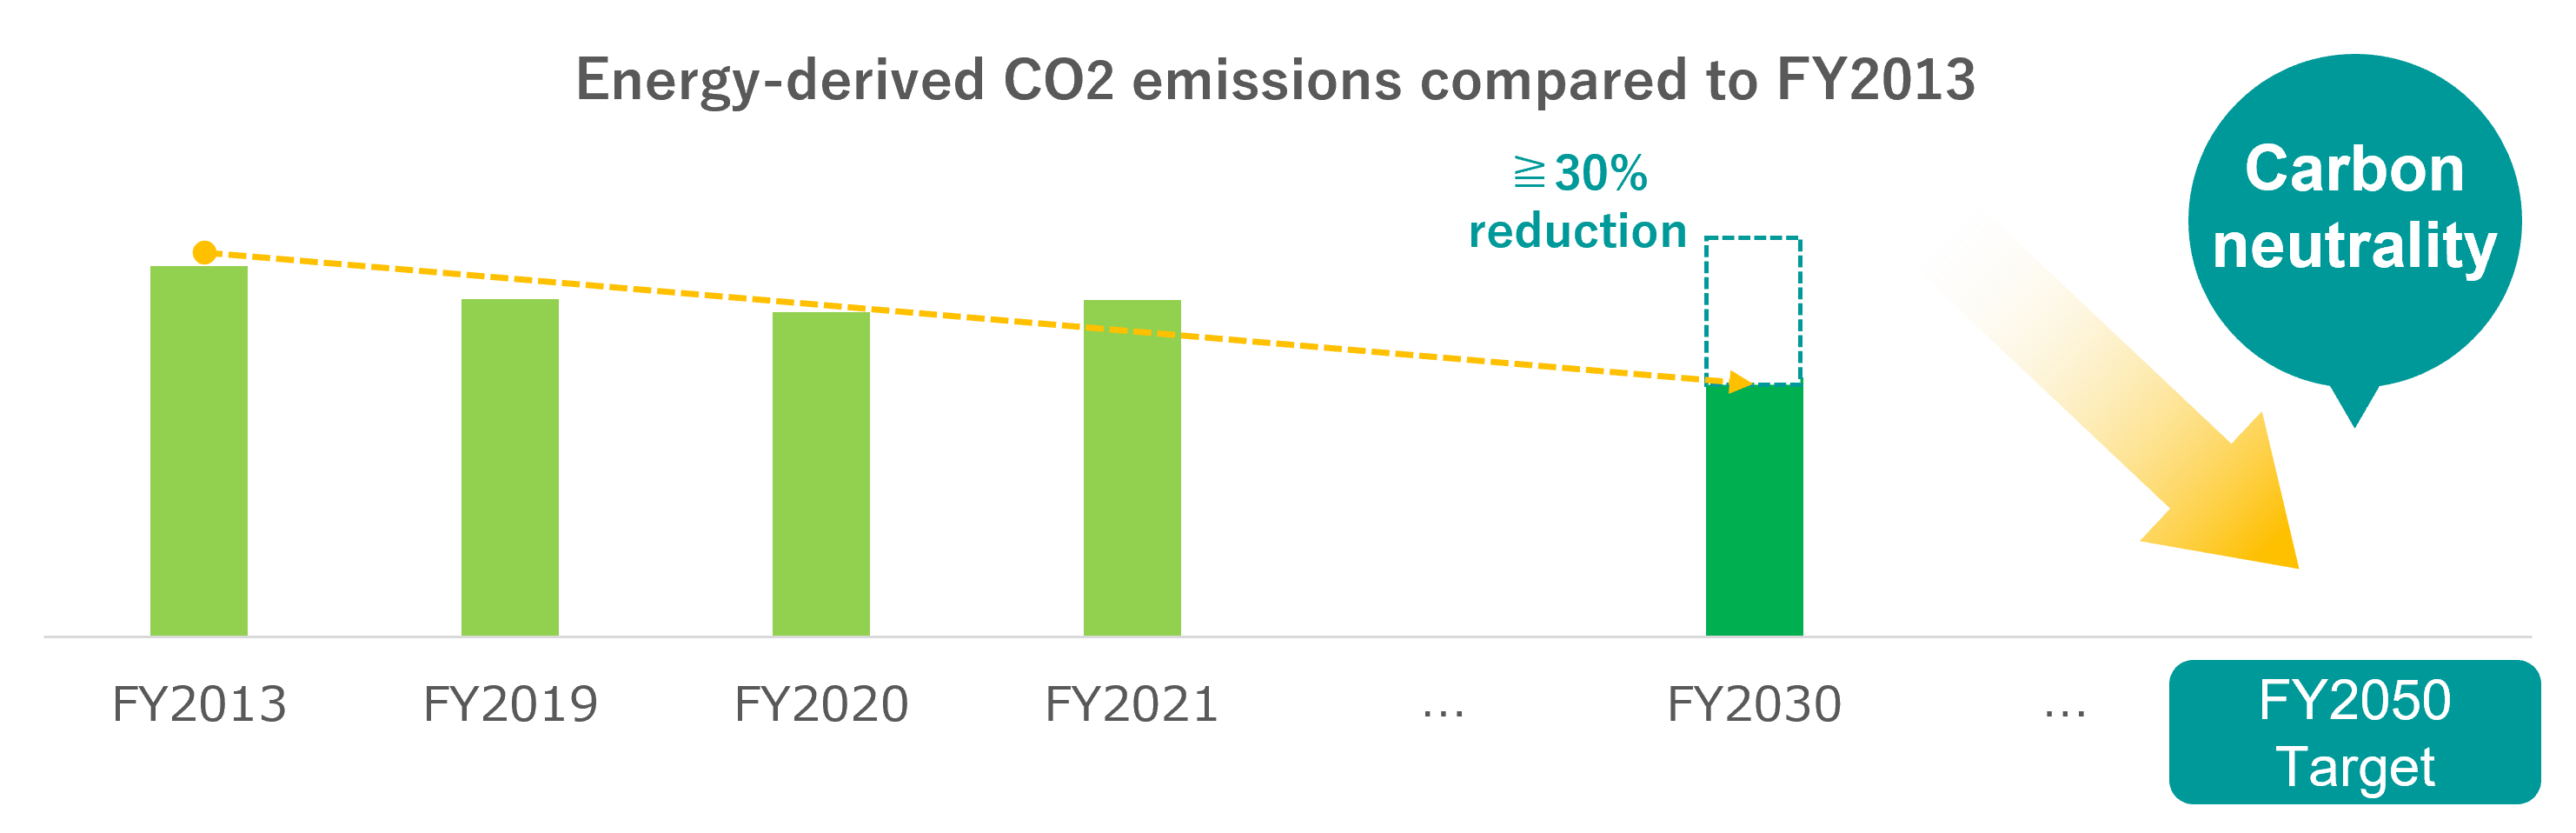 Energy-derived CO2 emissions compared to FY2013